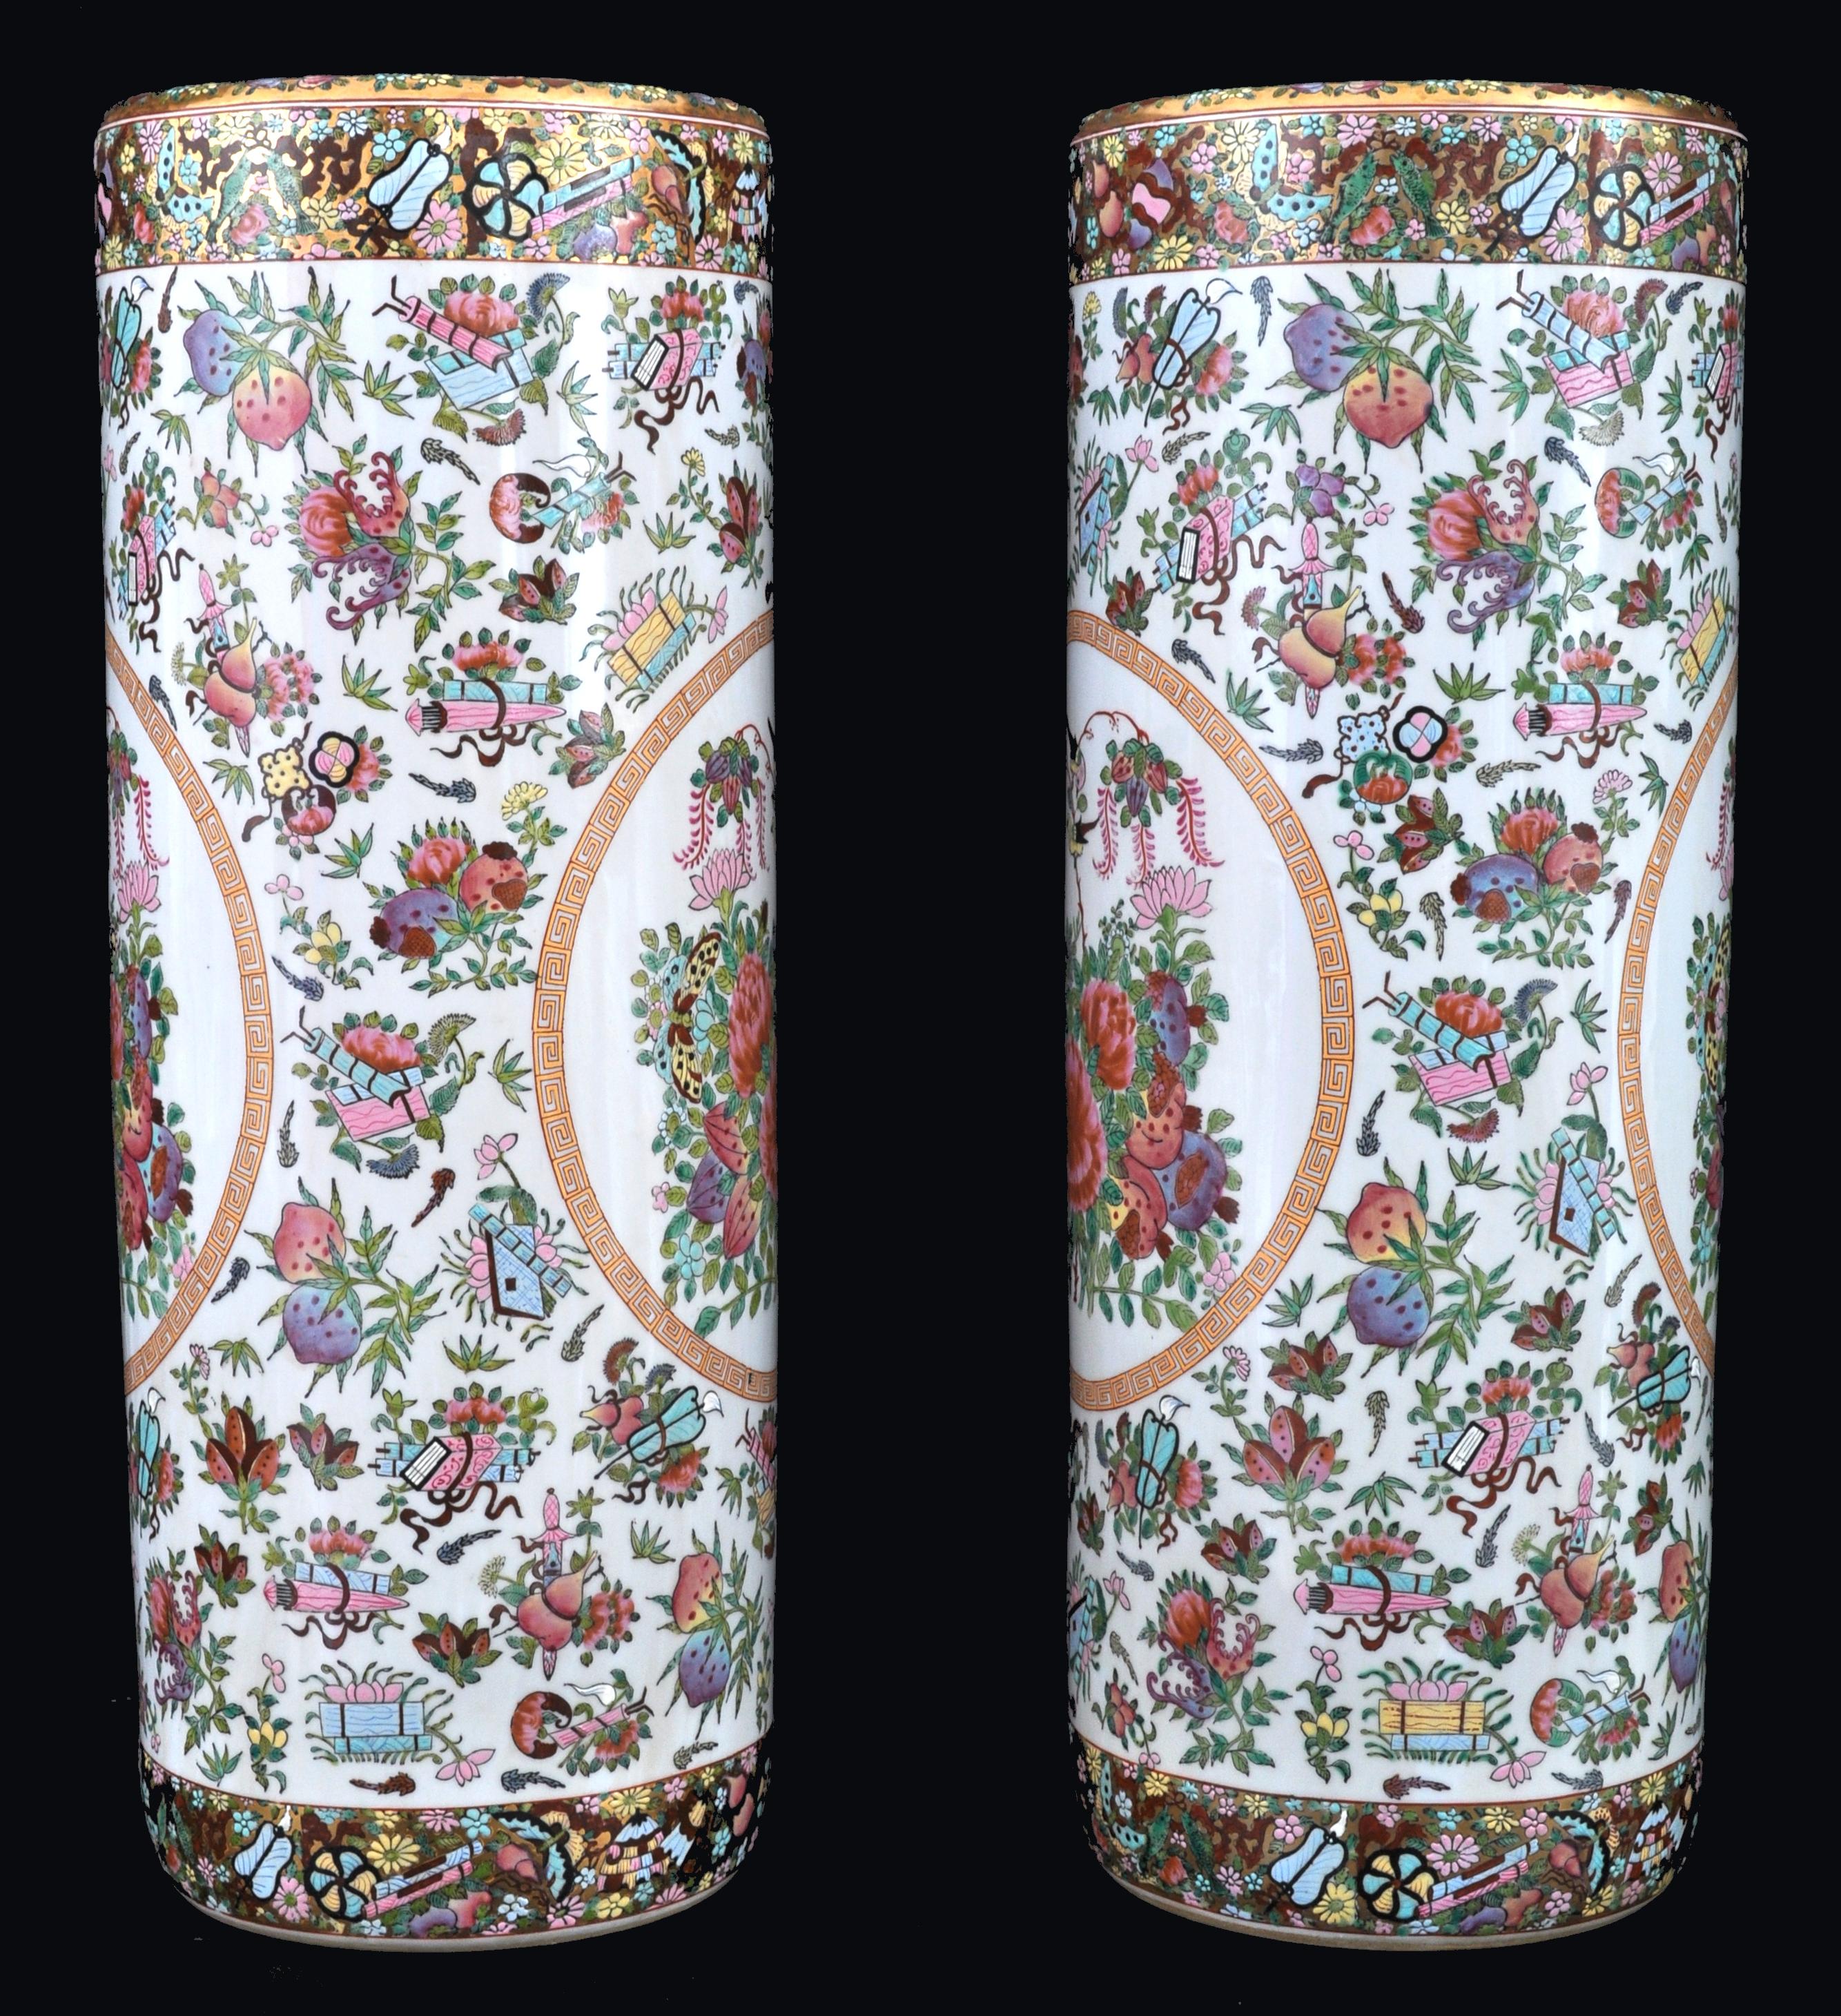 Pair of antique Chinese Famille Rose porcelain umbrella stands, Republic period, circa 1920. The stands having an all-over floral design with a central panel enclosing love birds. Each stand having a red six character mark to the base. Excellent